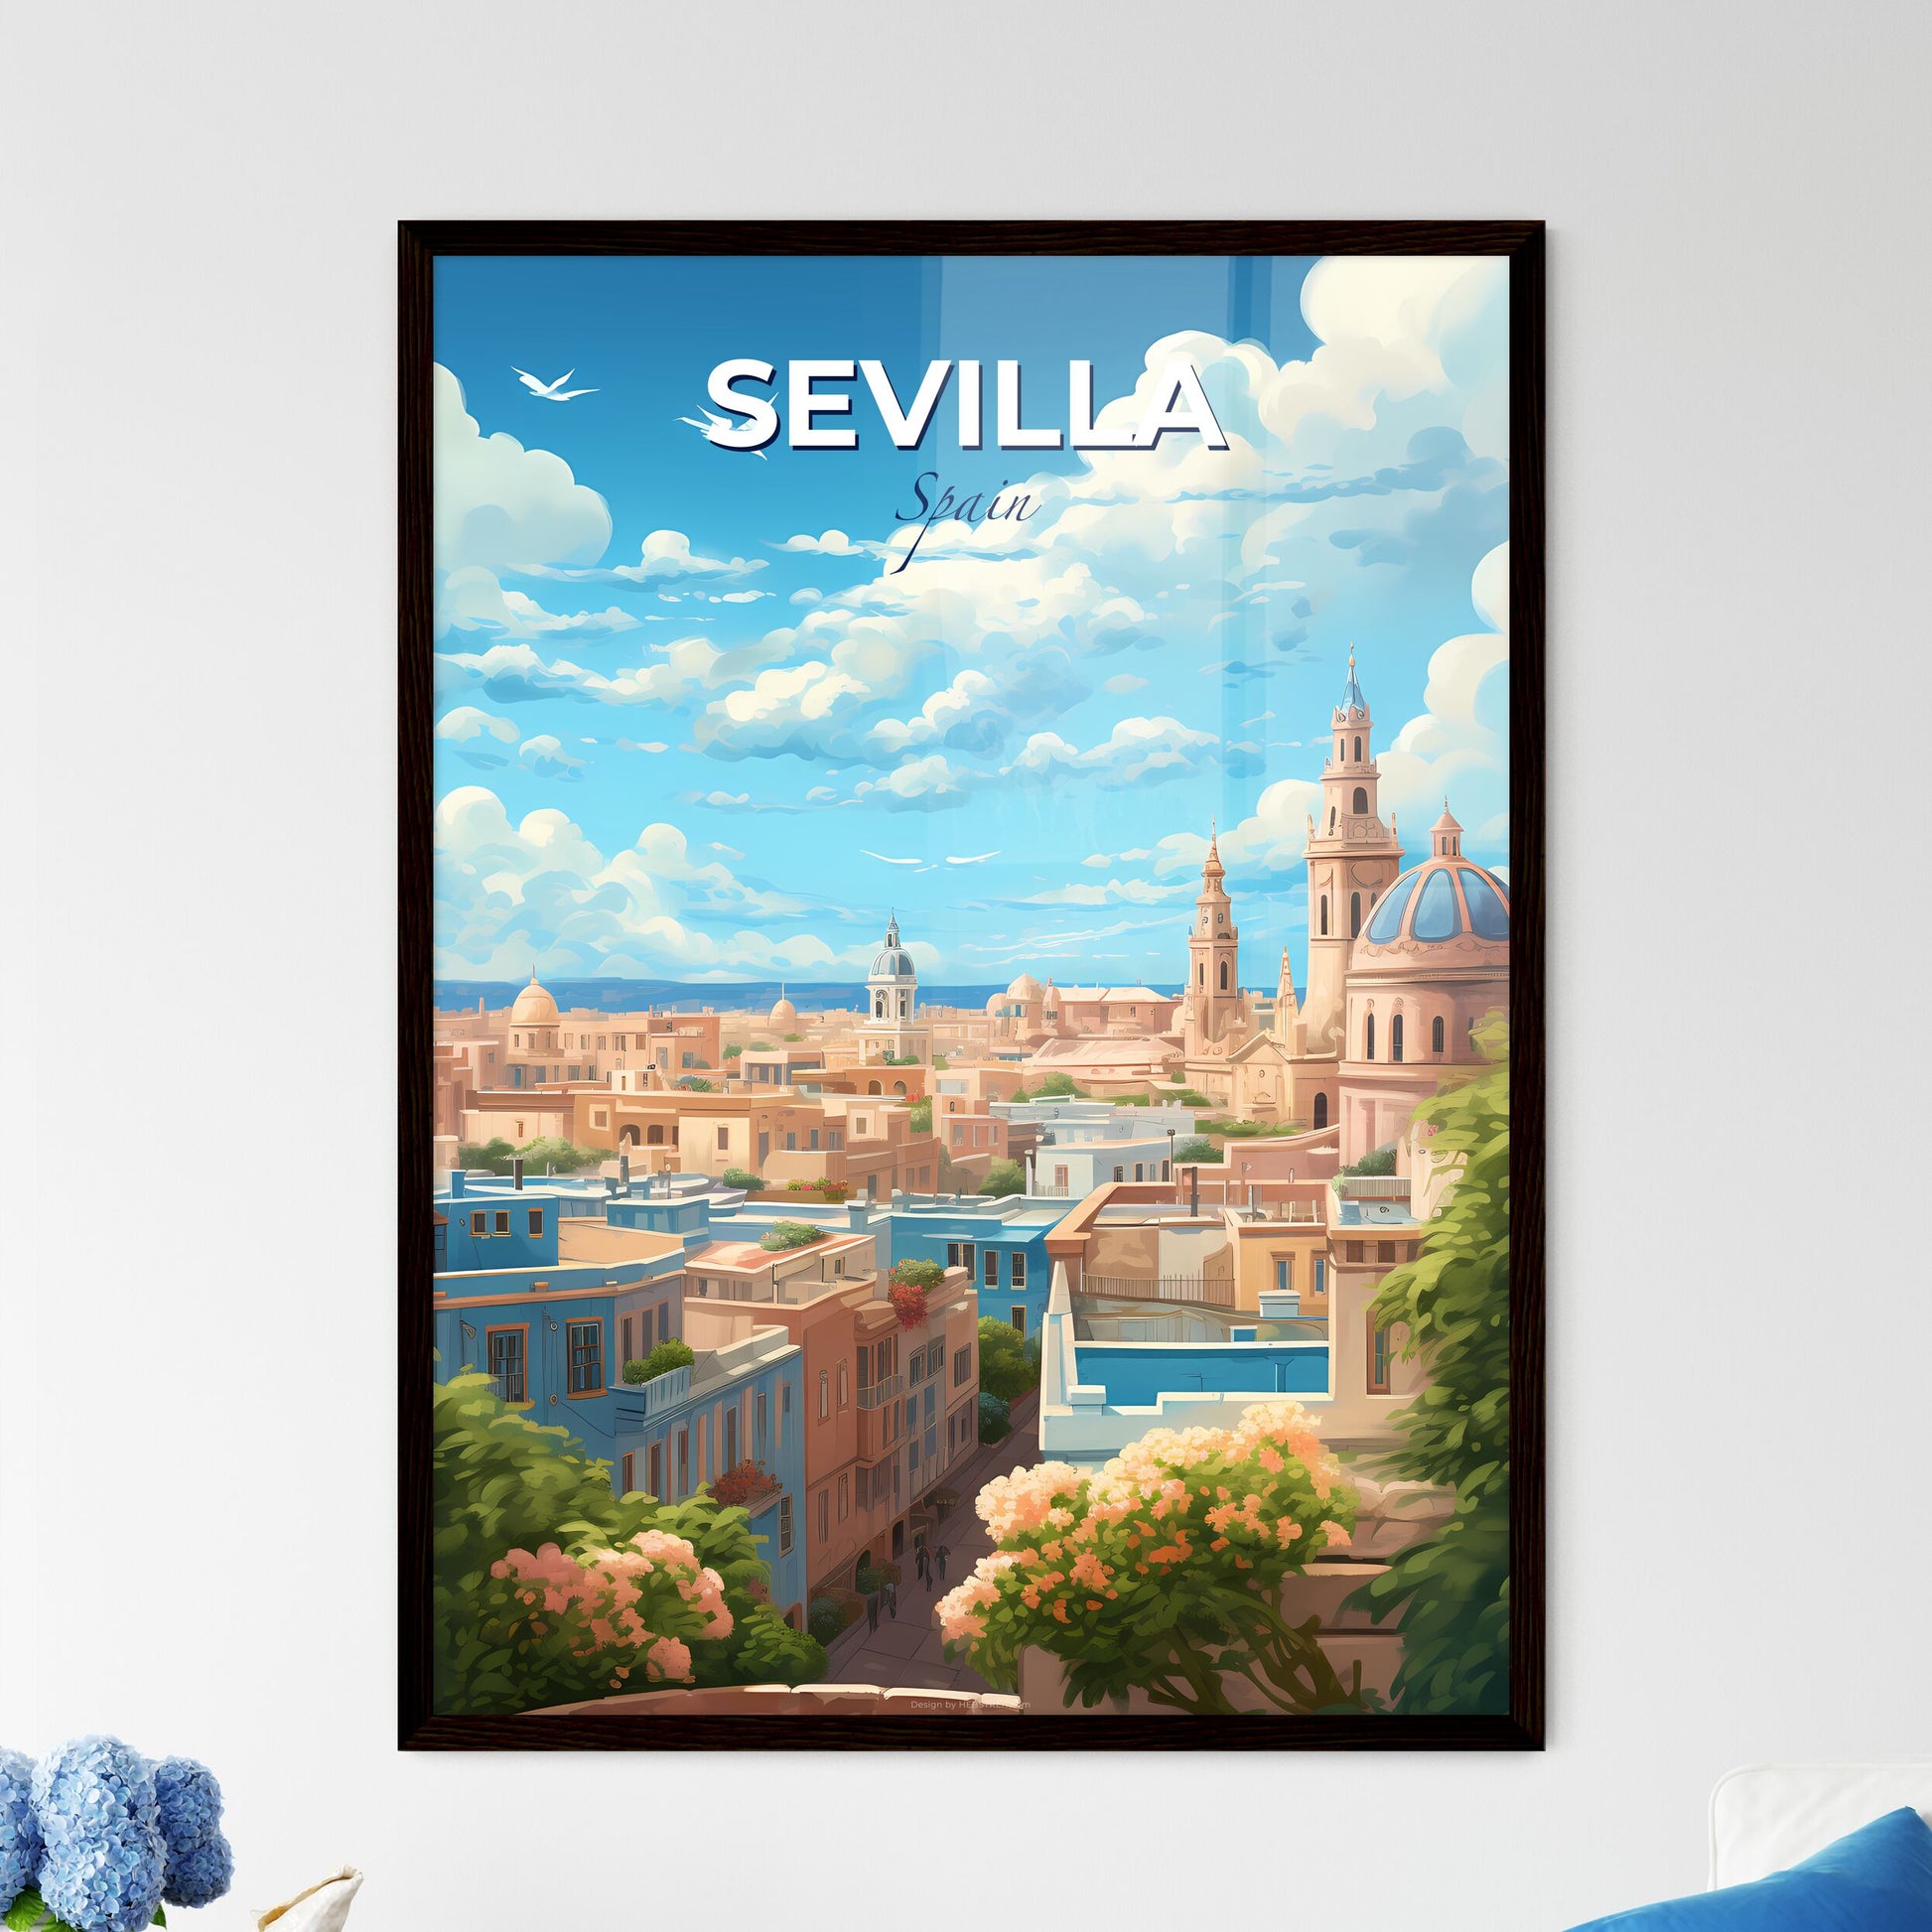 Sevilla Spain Skyline - A City With A Blue Sky And Clouds - Customizable Travel Gift Default Title